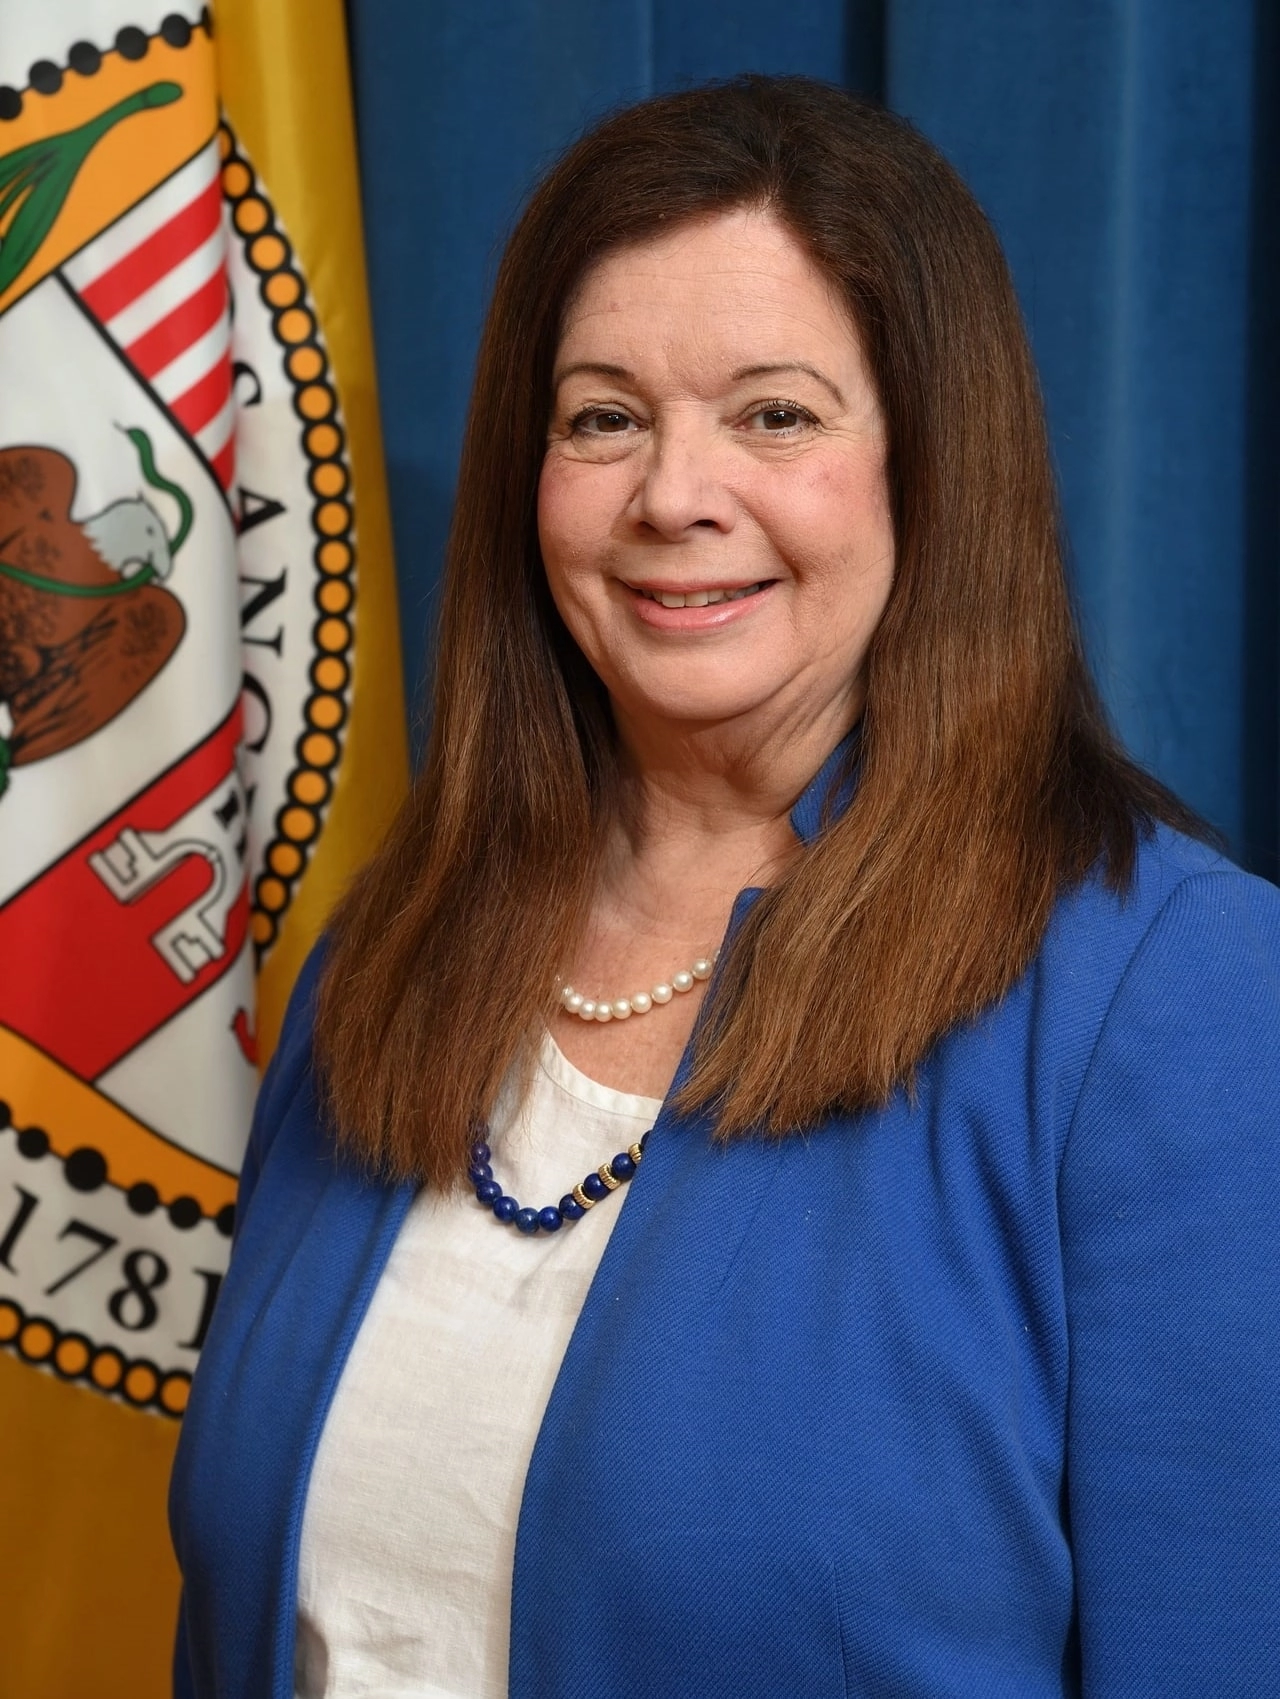 Portait of Los Angeles City Attorney Hydee Feldstein Soto in a blue blazer, standing in front of a blue curtain and flag of the City of Los Angeles.